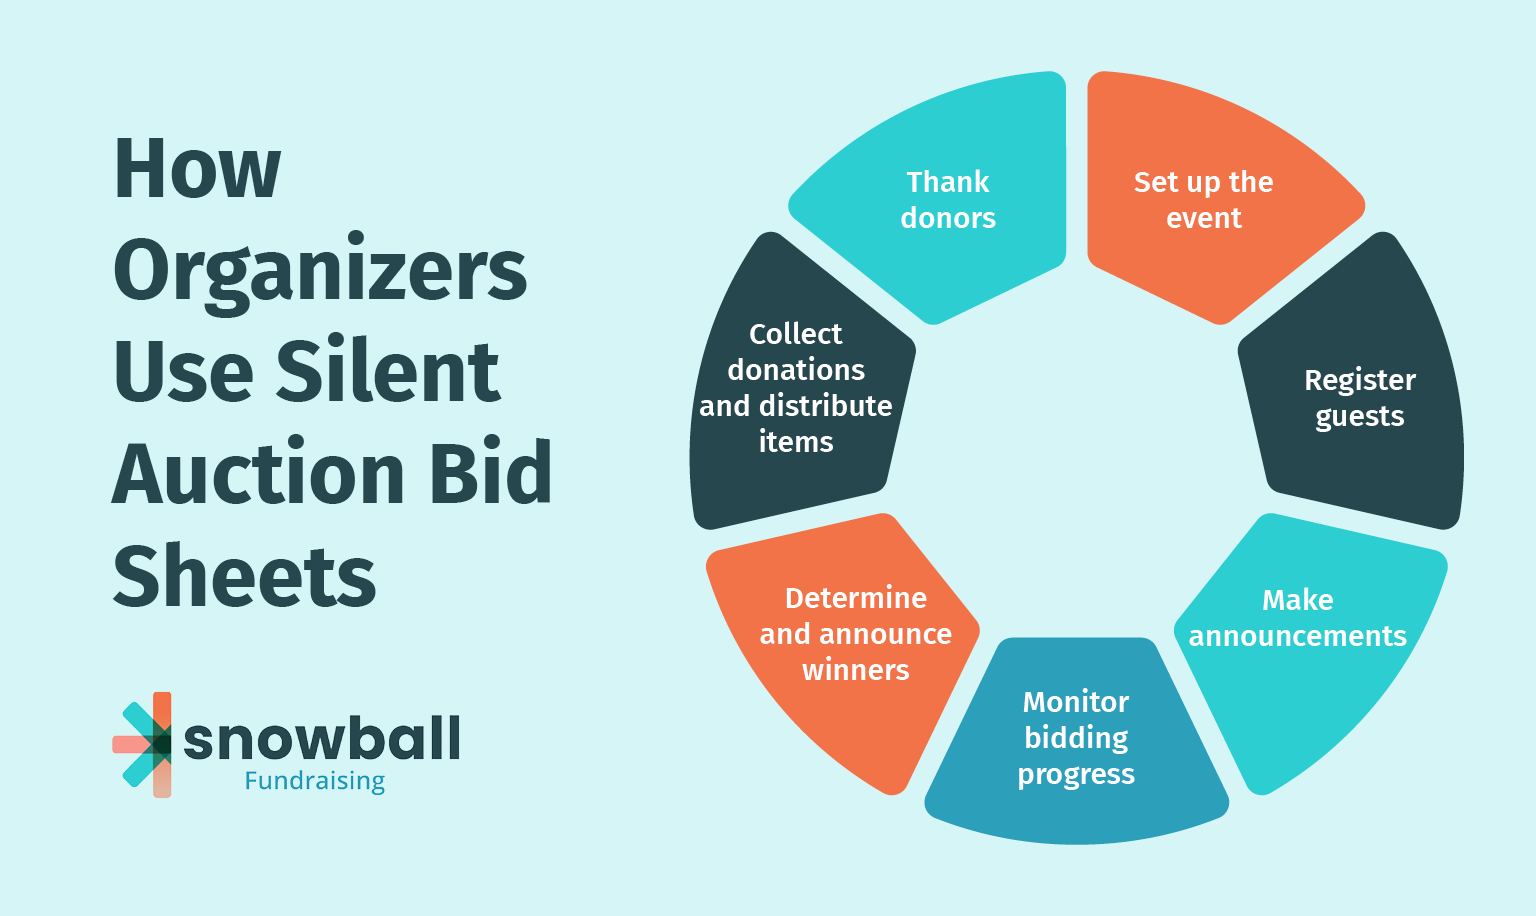 A list of steps for event organizers to use silent auction bid sheets, which are detailed in the text below